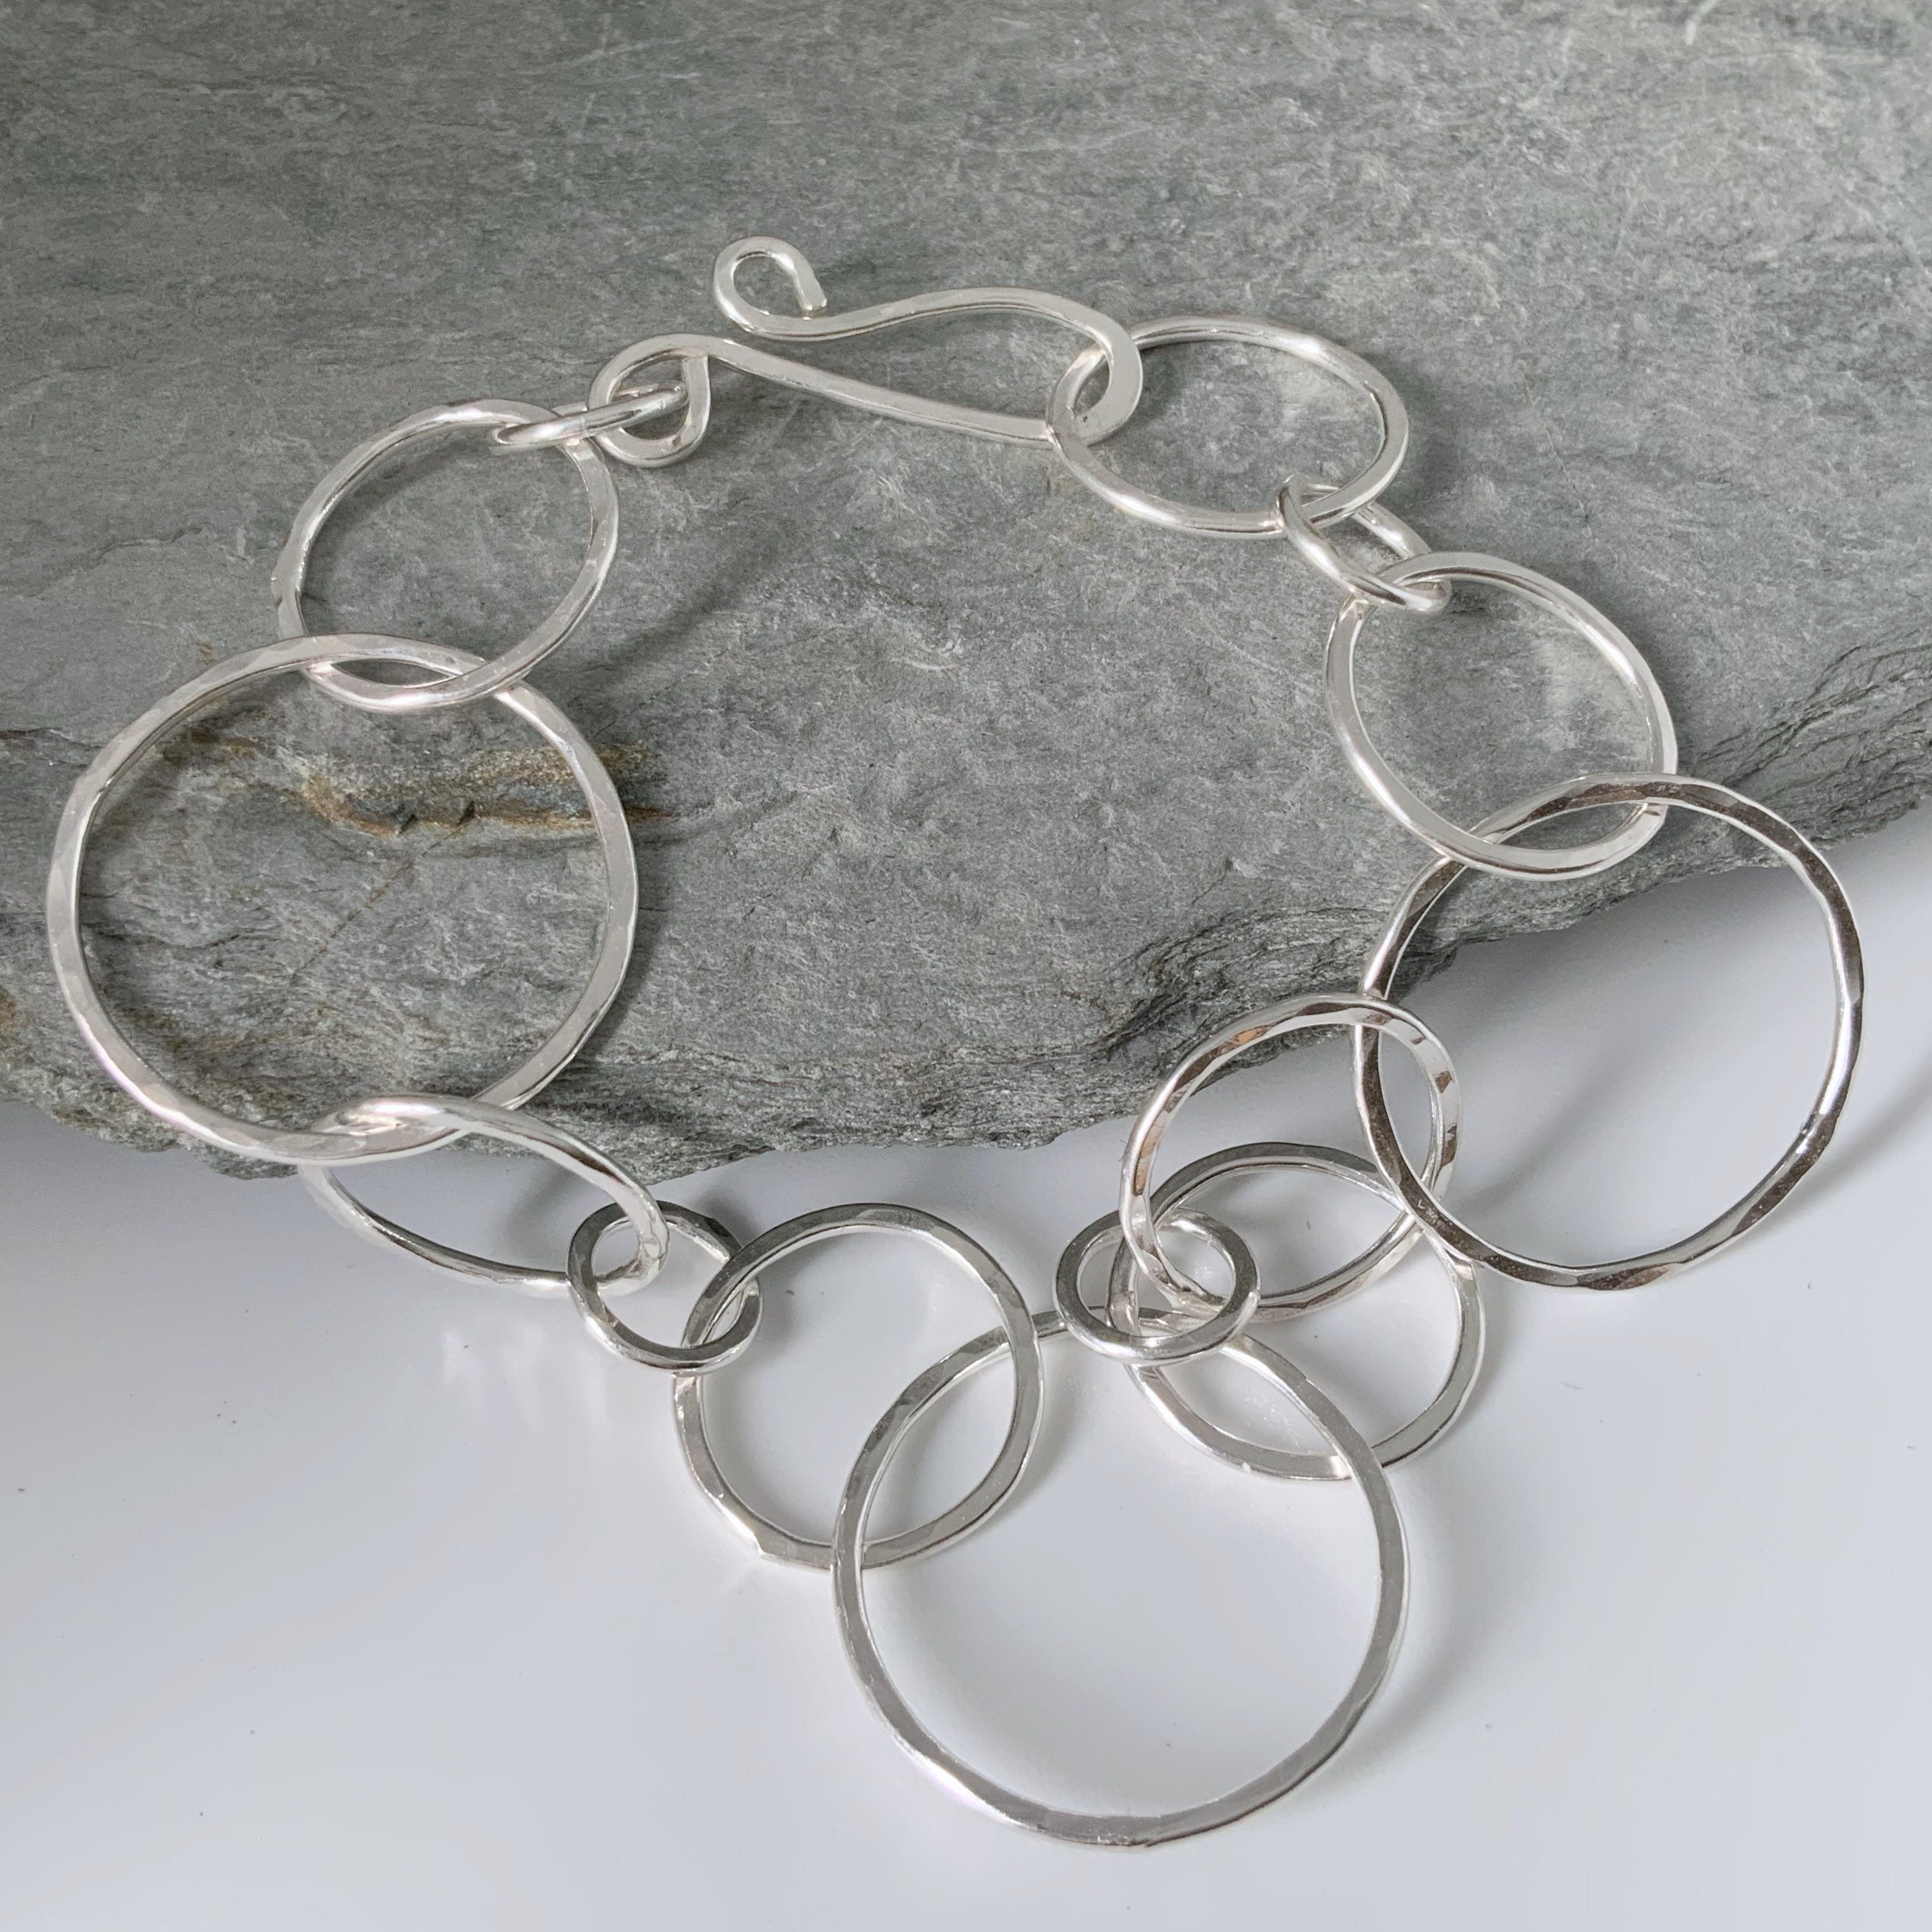 Silver Chain Bracelet, Handmade Round Links Bracelet With A Sparkly Hammered Finish, Chunky Silver Large Circle